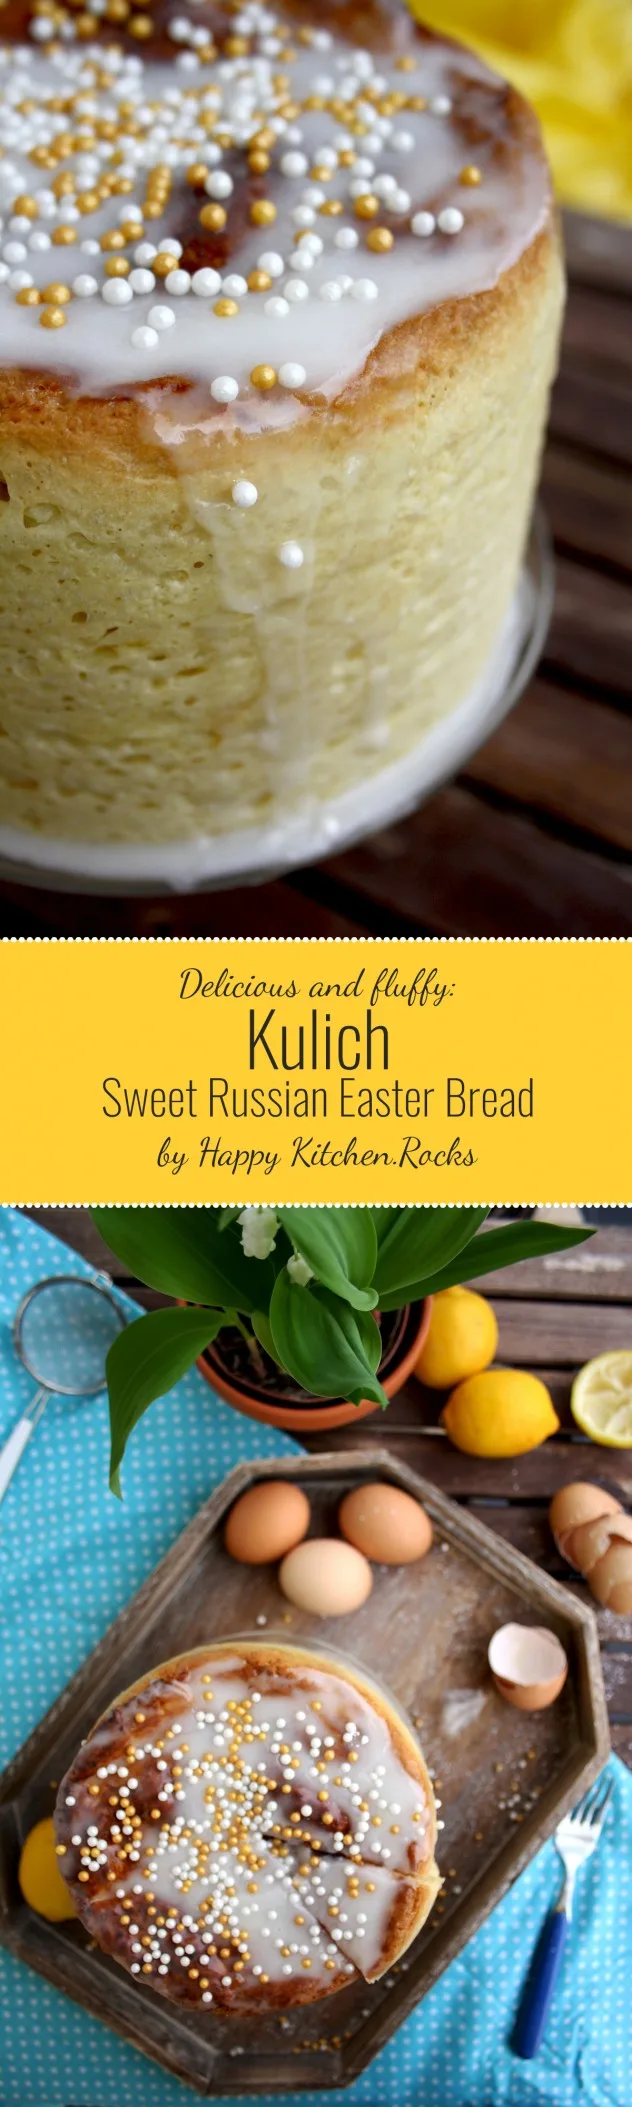 Russian Kulich (sweet Easter bread) is fluffy, fragrant, soft and aromatic. This recipe is healthier and less time-consuming than the original. This kulich doesn't go stale for more than 10 days!